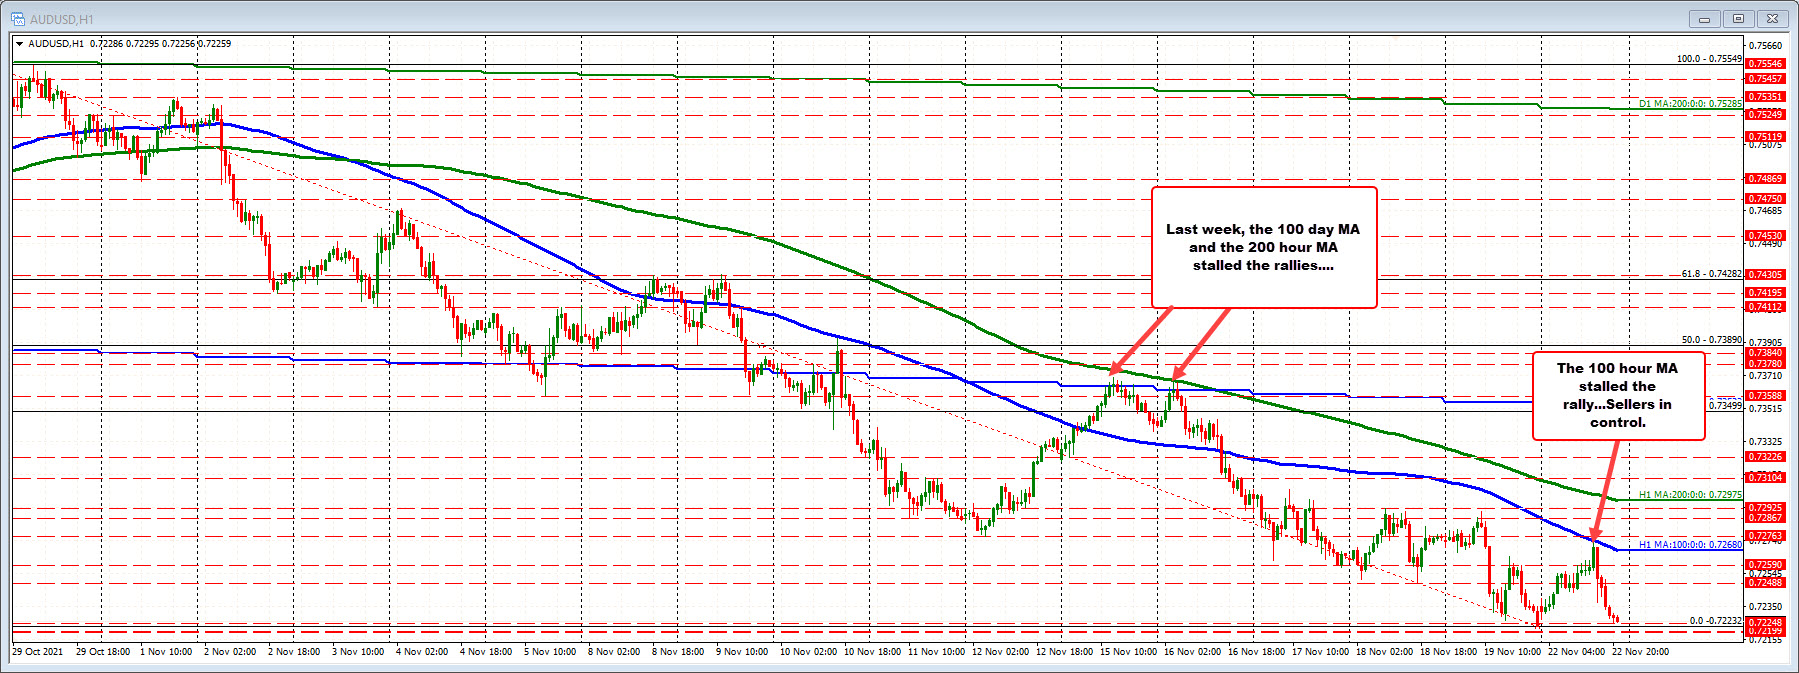 The AUDUSD on the hourly chart.